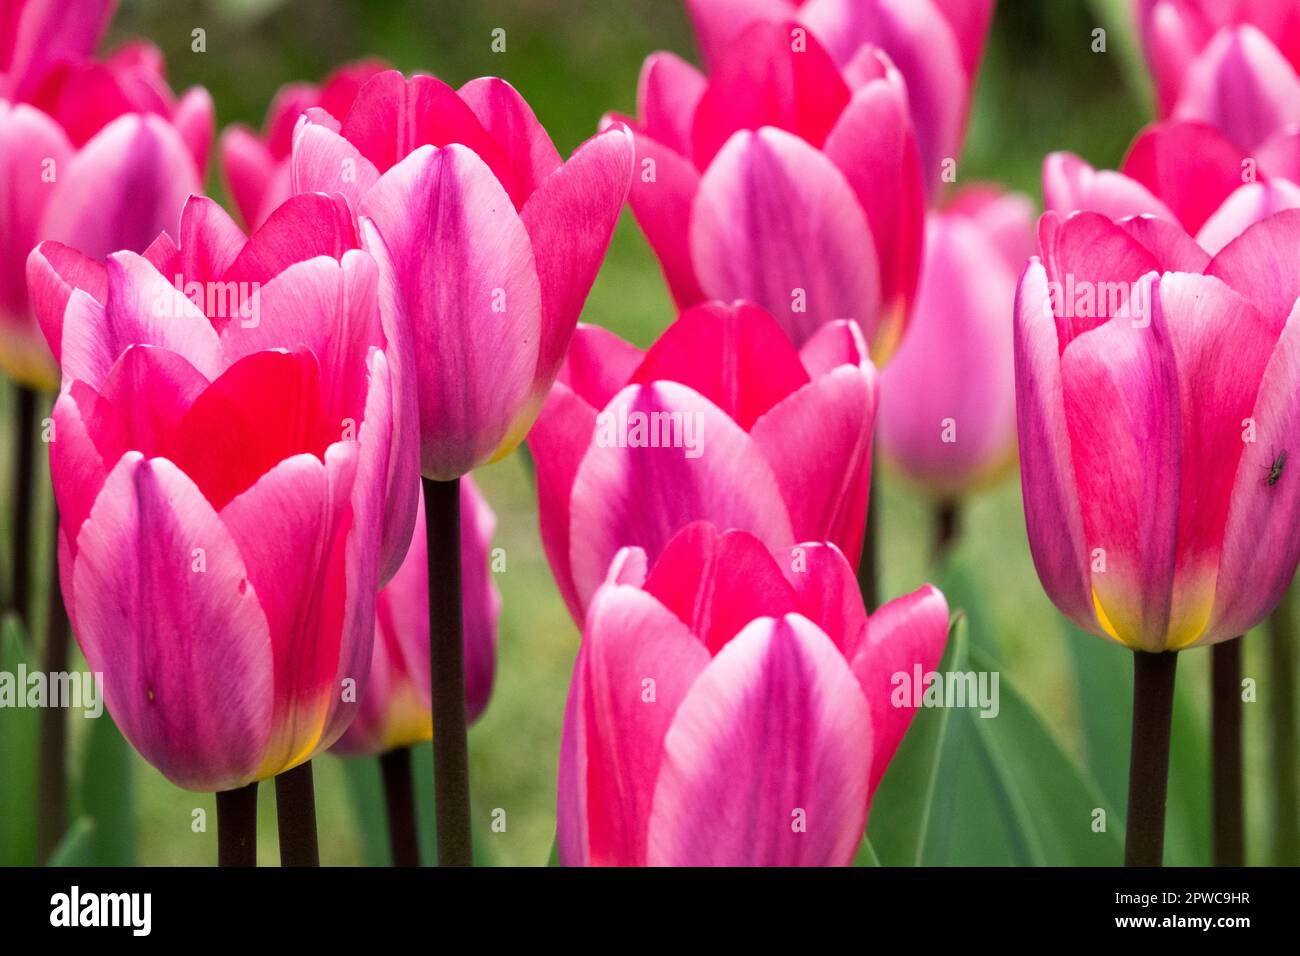 Pink Tulips 'Light and Dreamy' Stock Photo